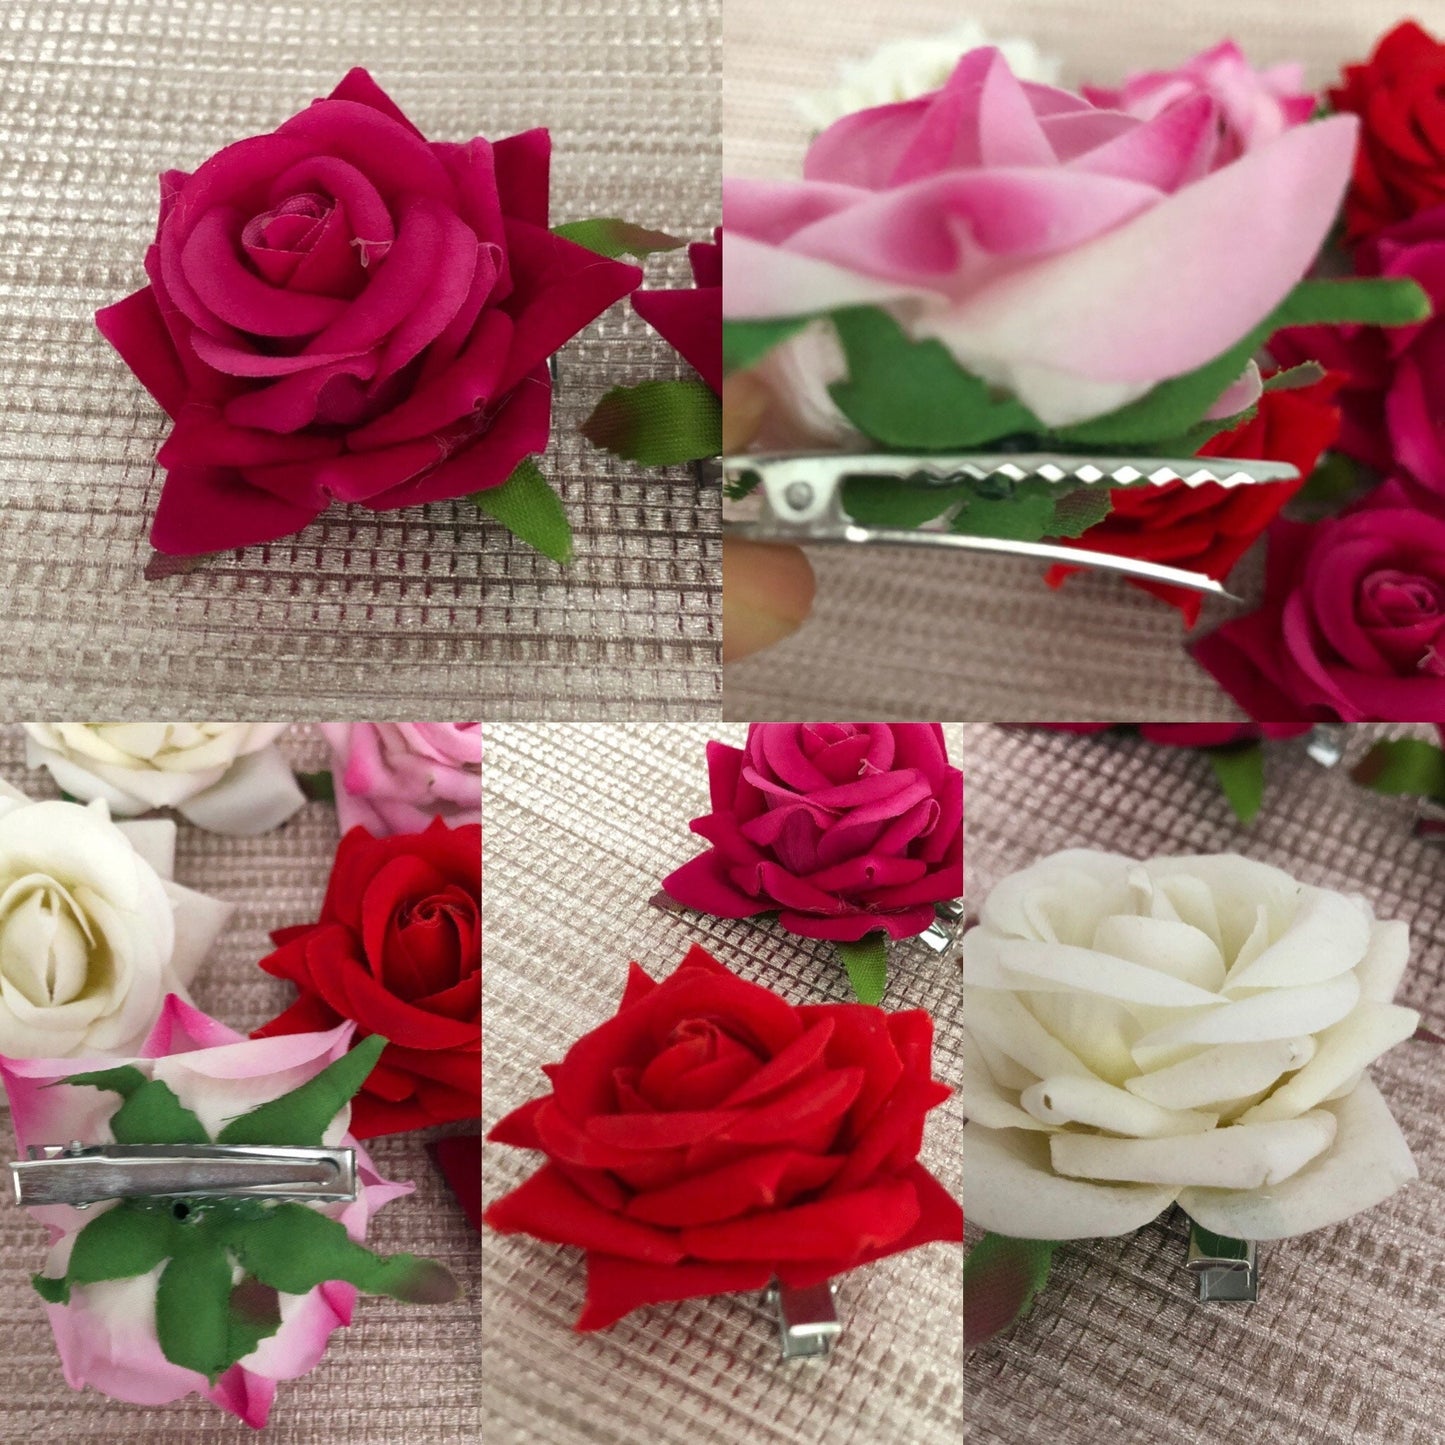 Pair of Rose Hair Slides in Choice of Colours perfect for Styling Hair Buns Burlesque Carmen Flower Rose Flamenco Dancer Pin up Hair Clip